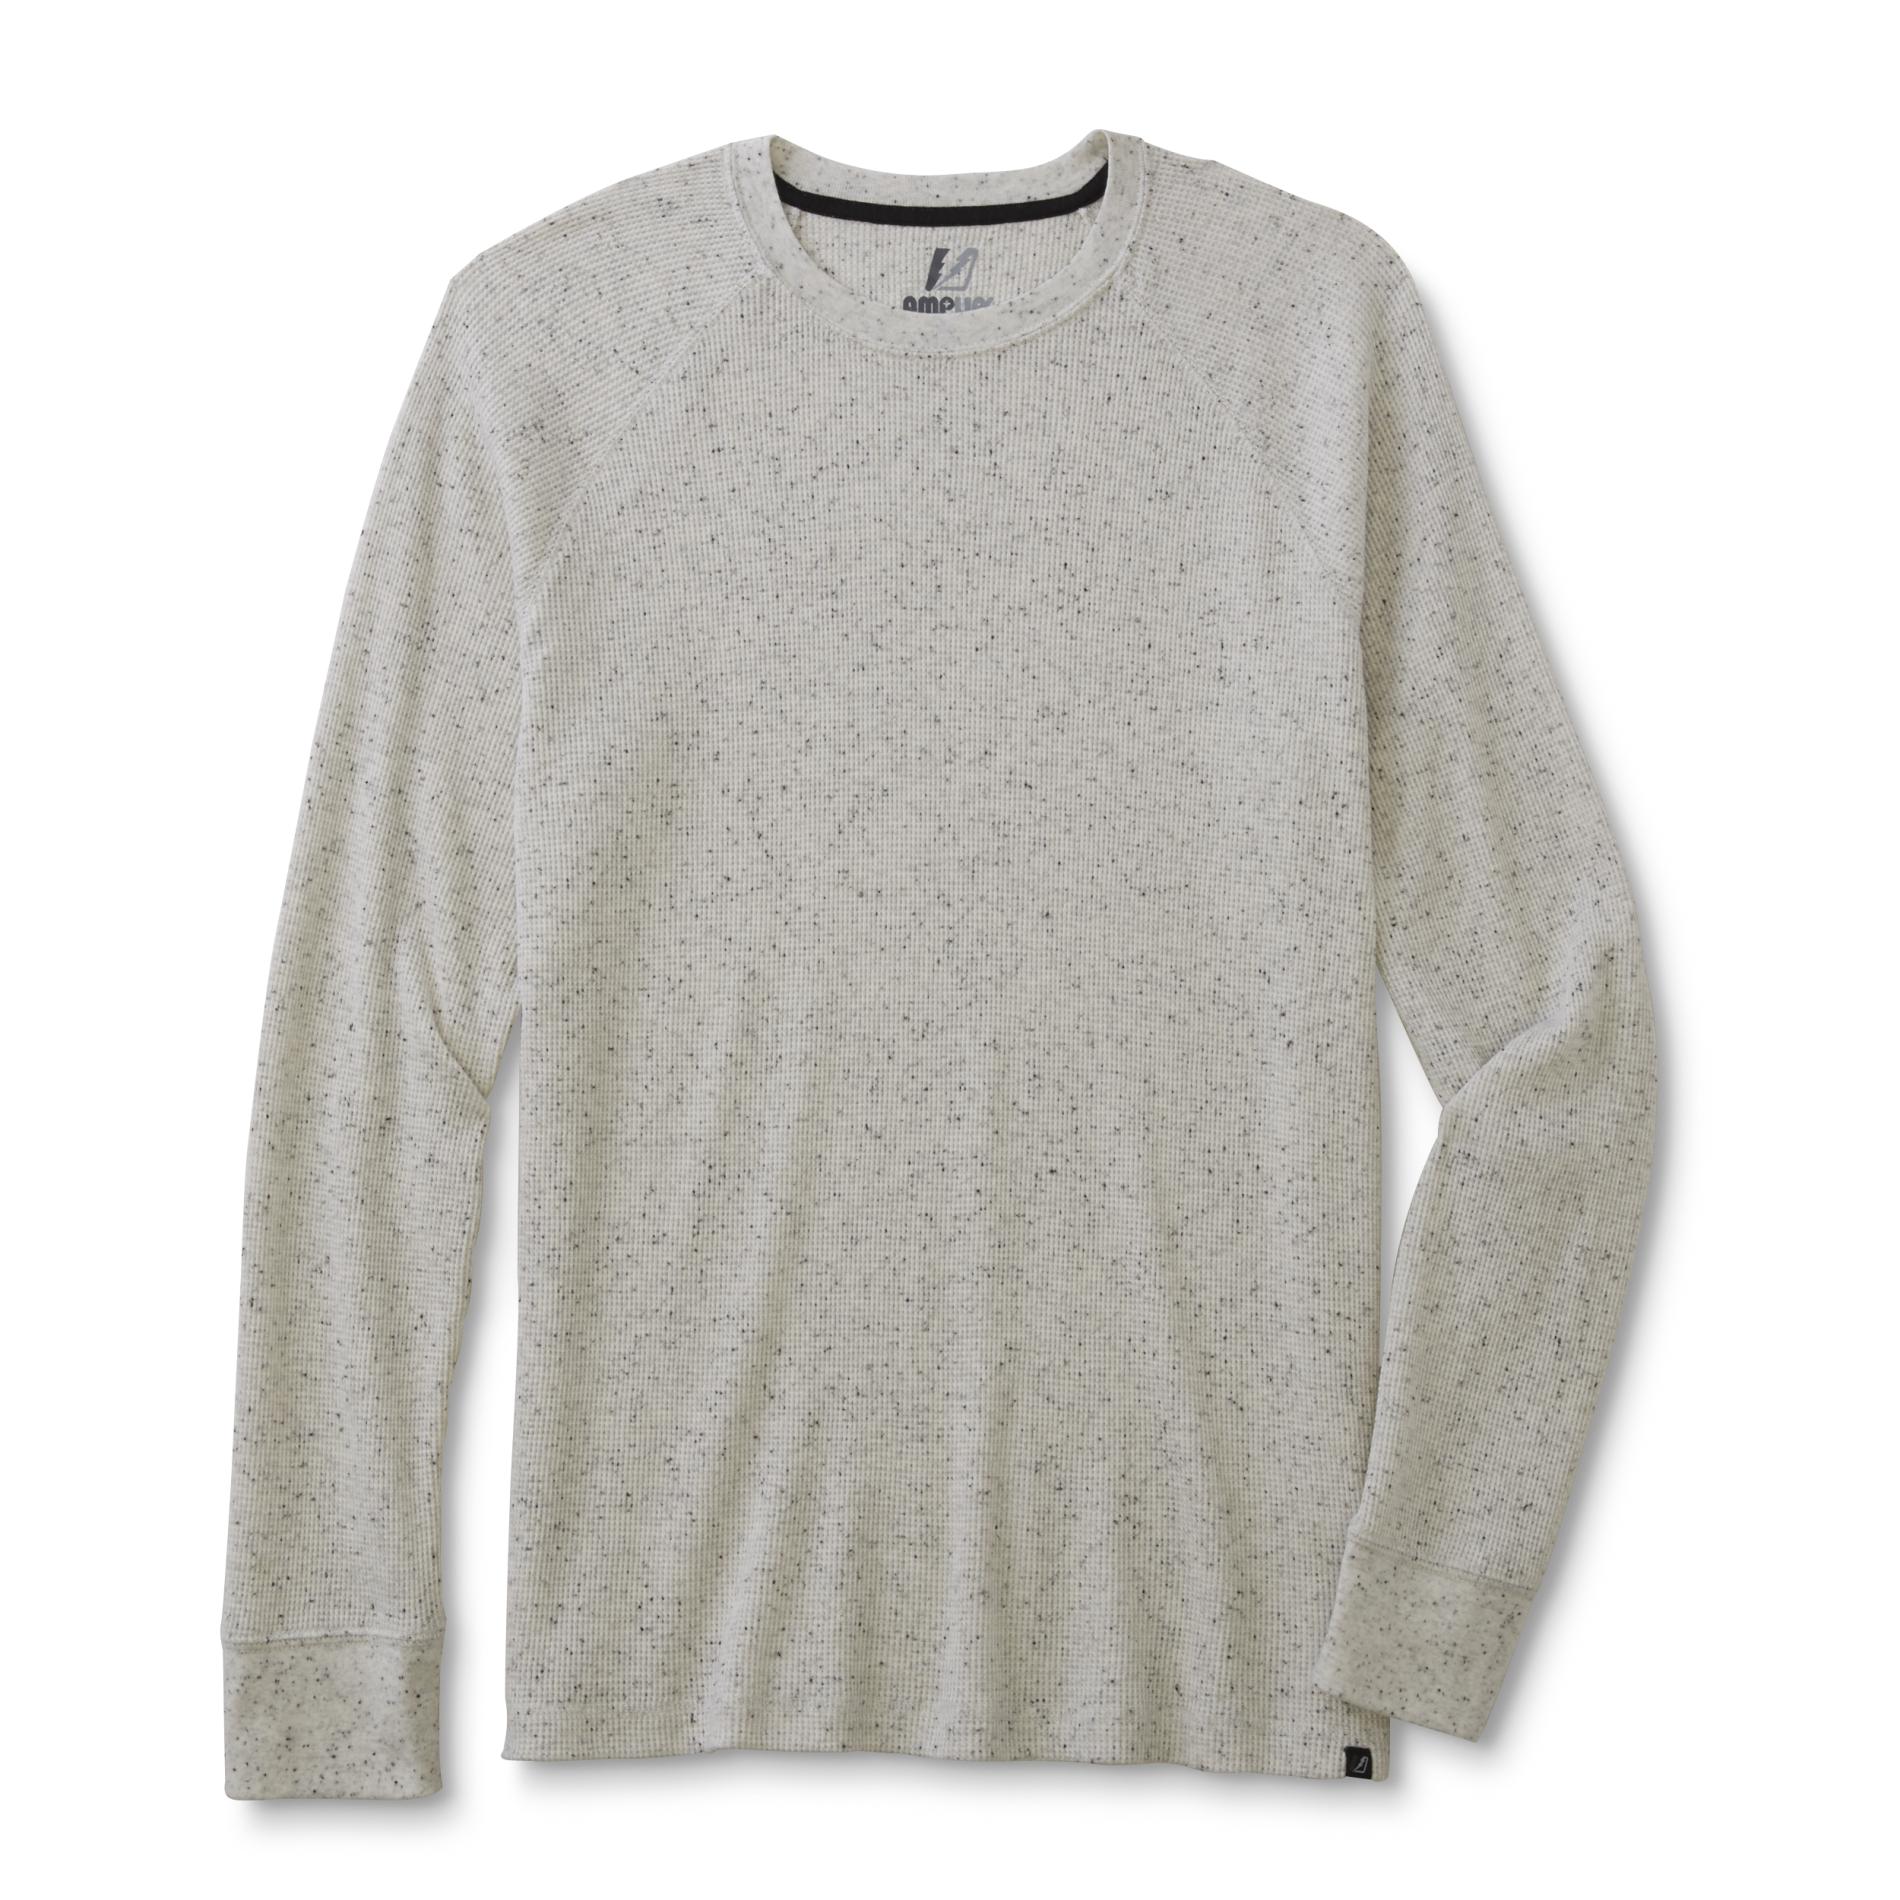 Amplify Young Men's Thermal Shirt - Flecked